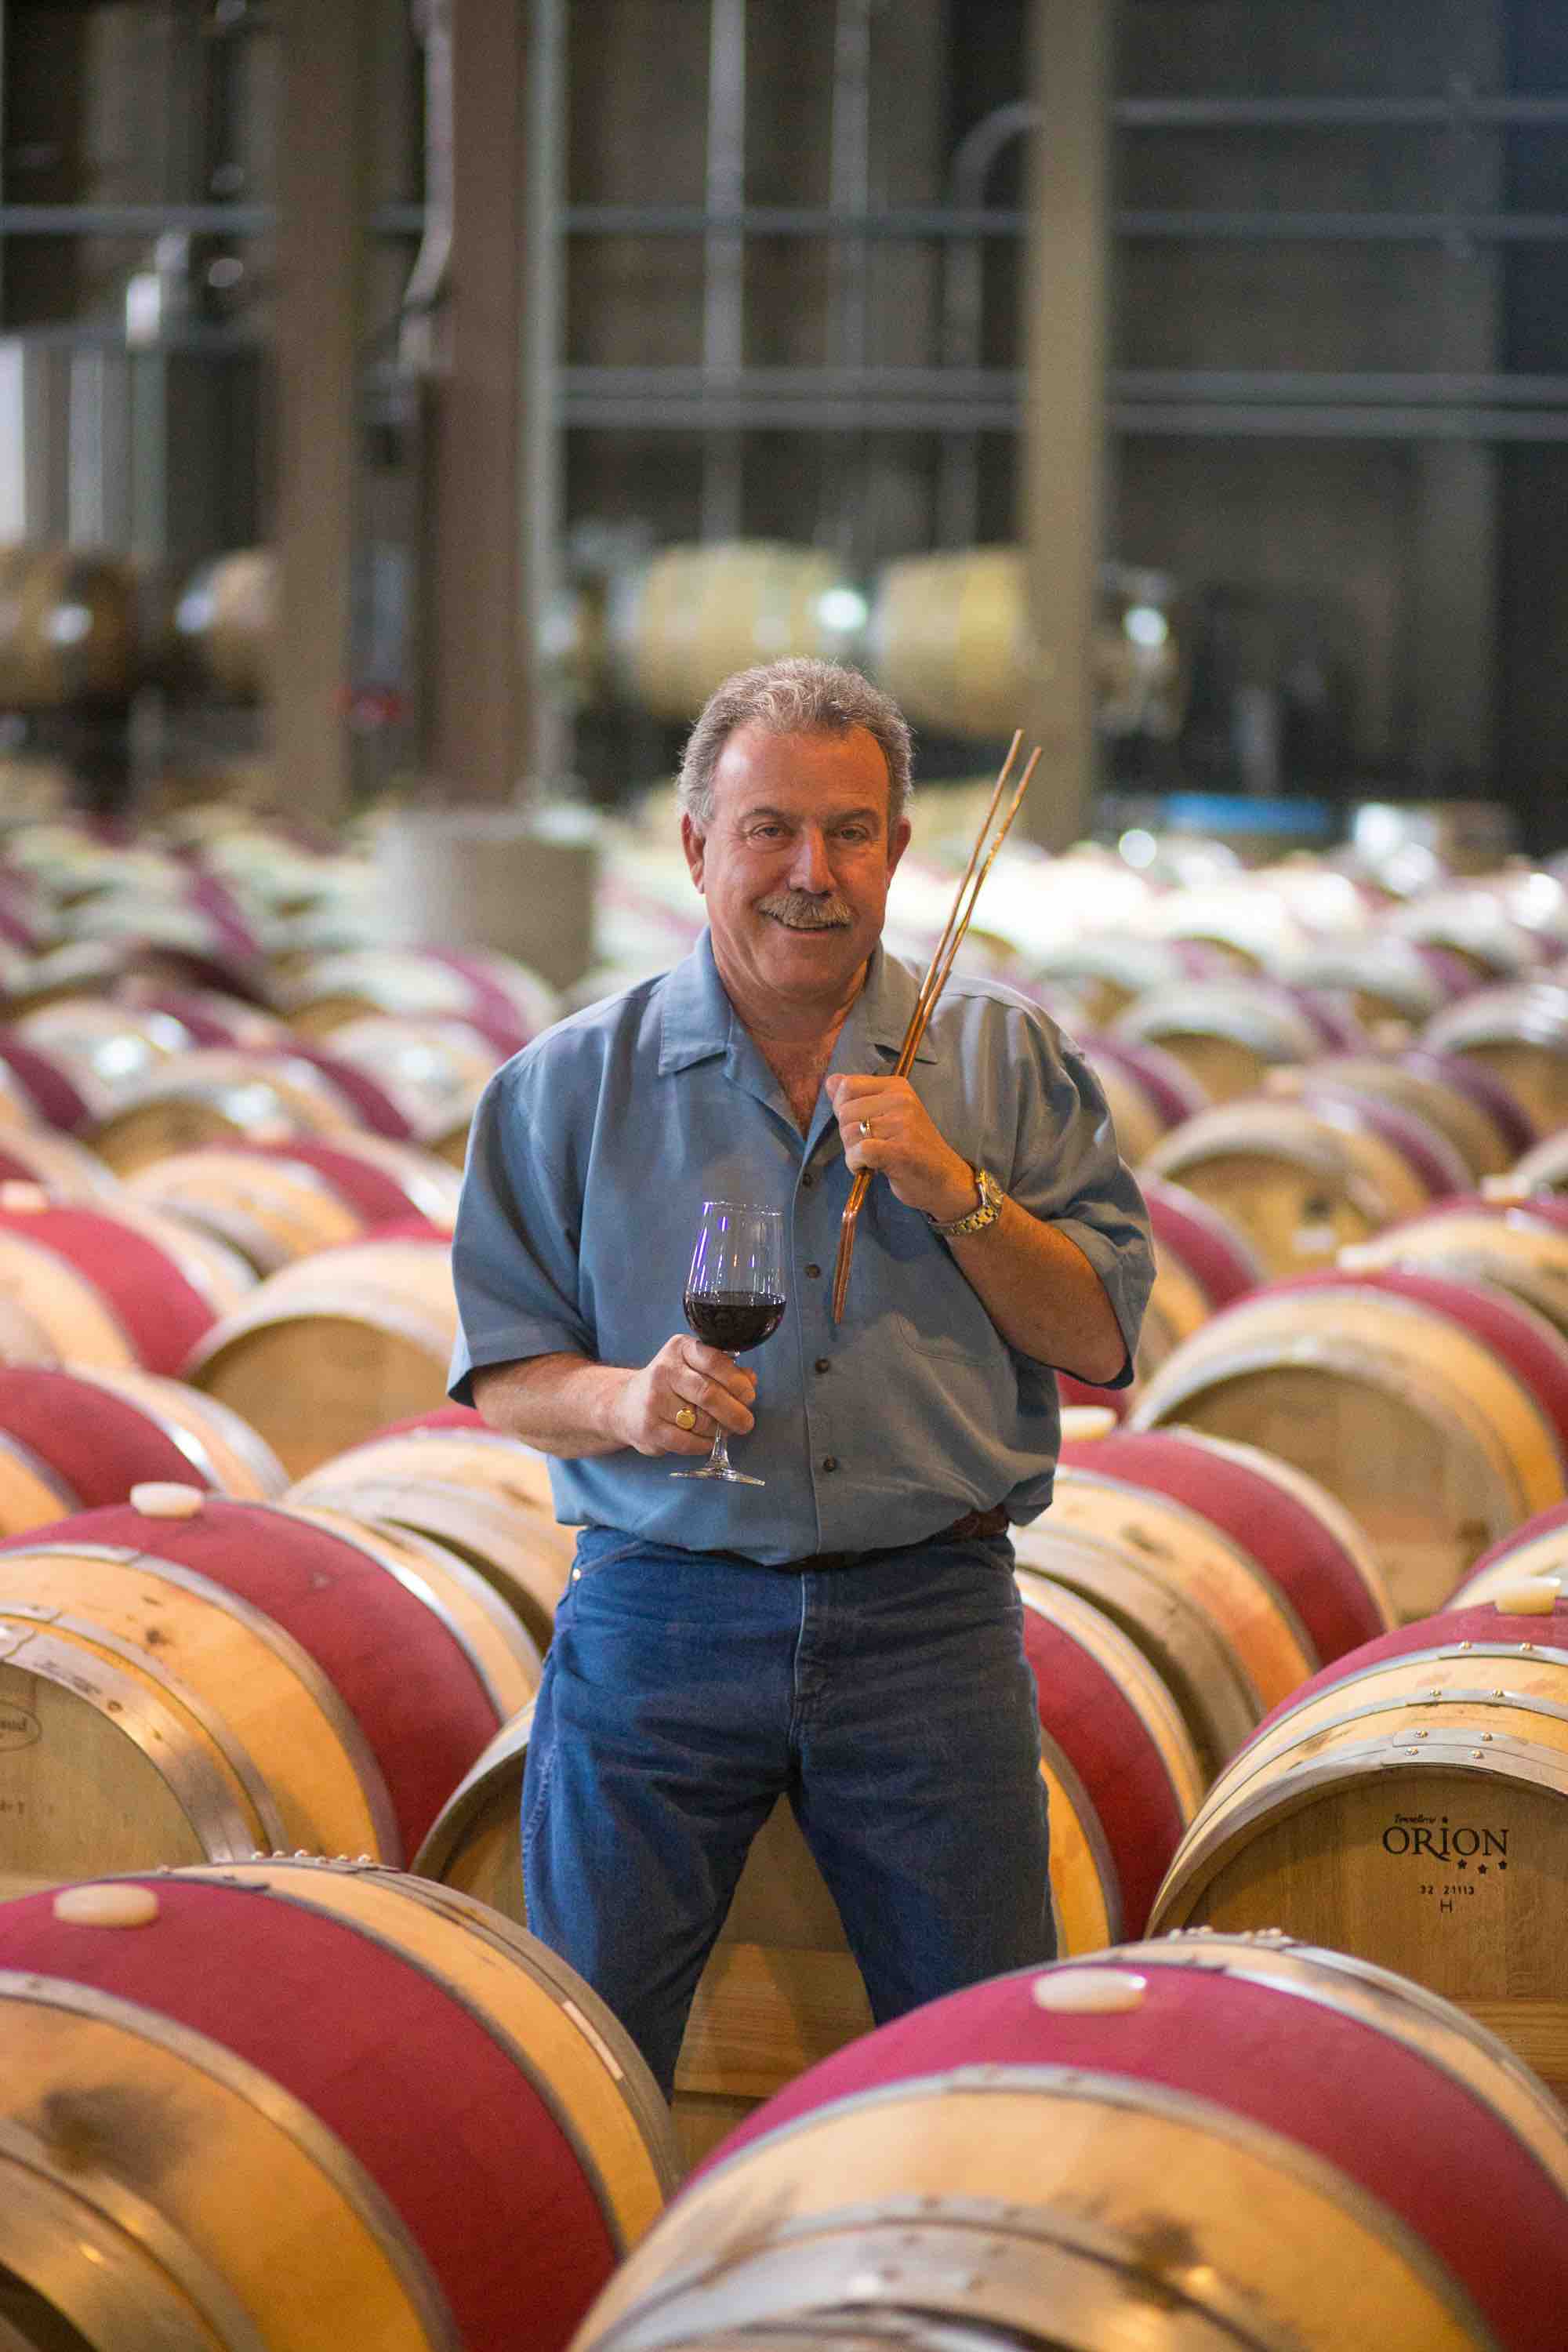 Marc Mondavi's Divining Rod wines are named for his “sixth sense” for water divining (also called water witching or dowsing).